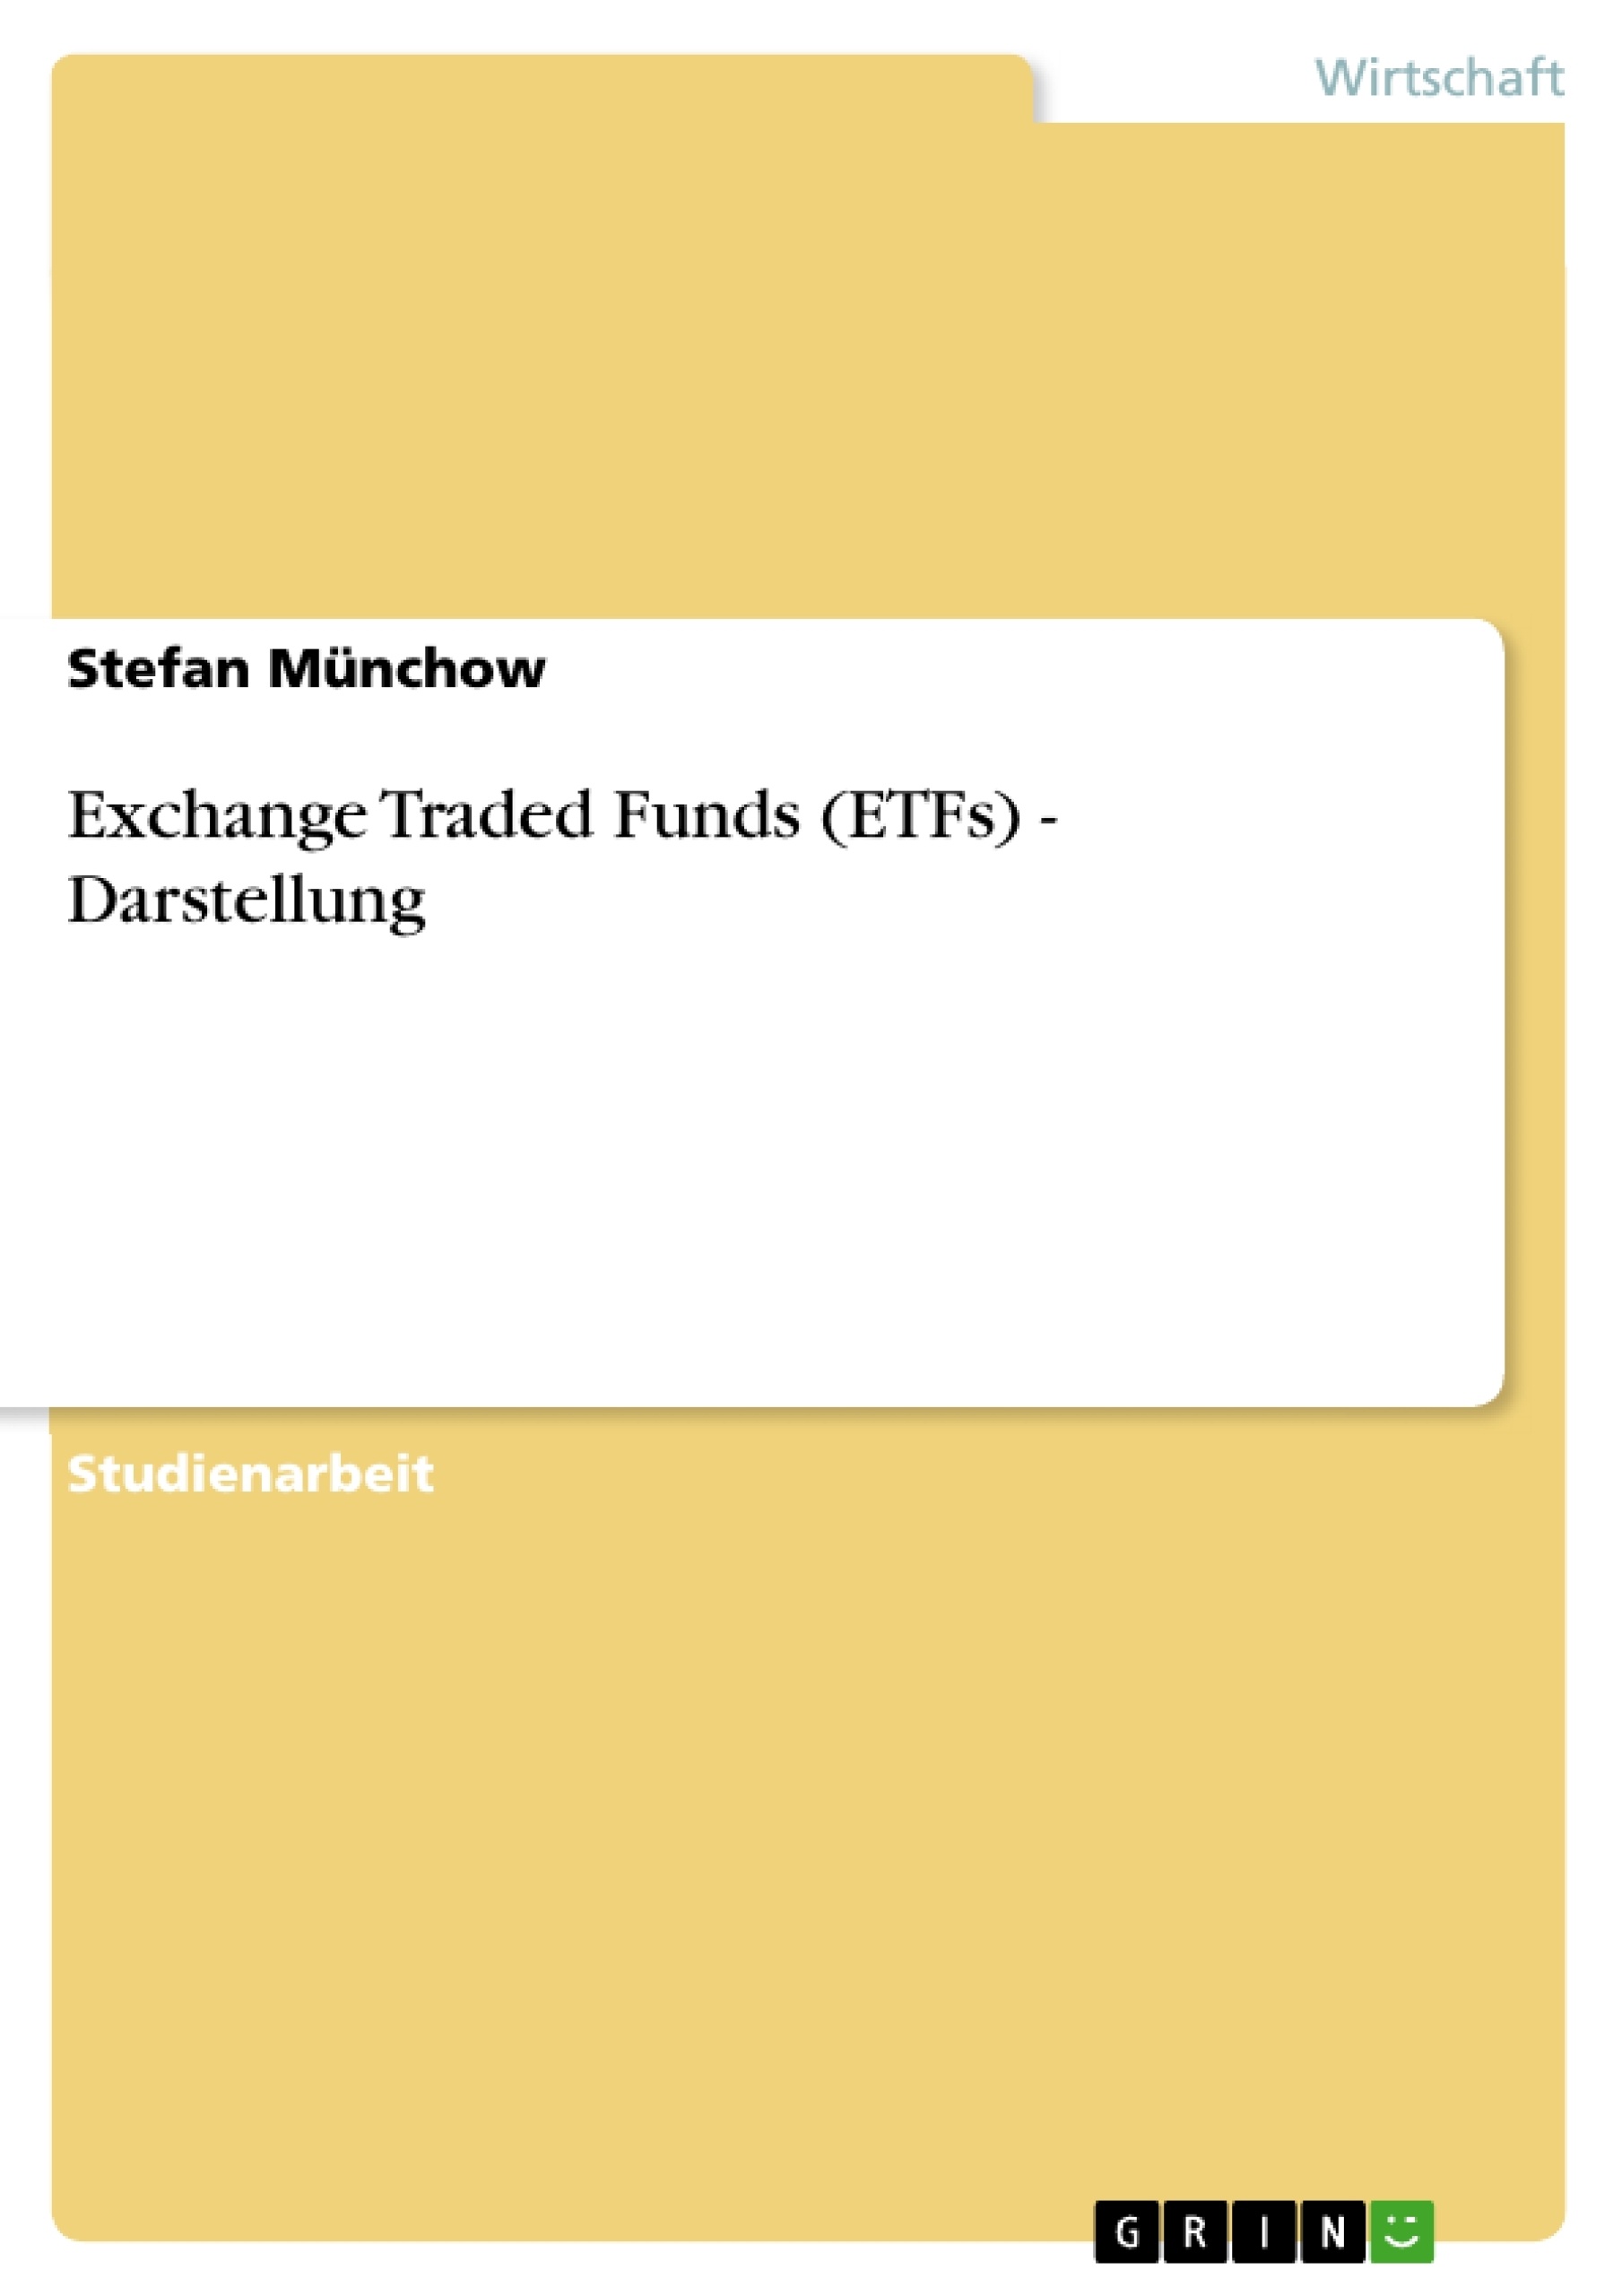 Título: Exchange Traded Funds (ETFs) - Darstellung